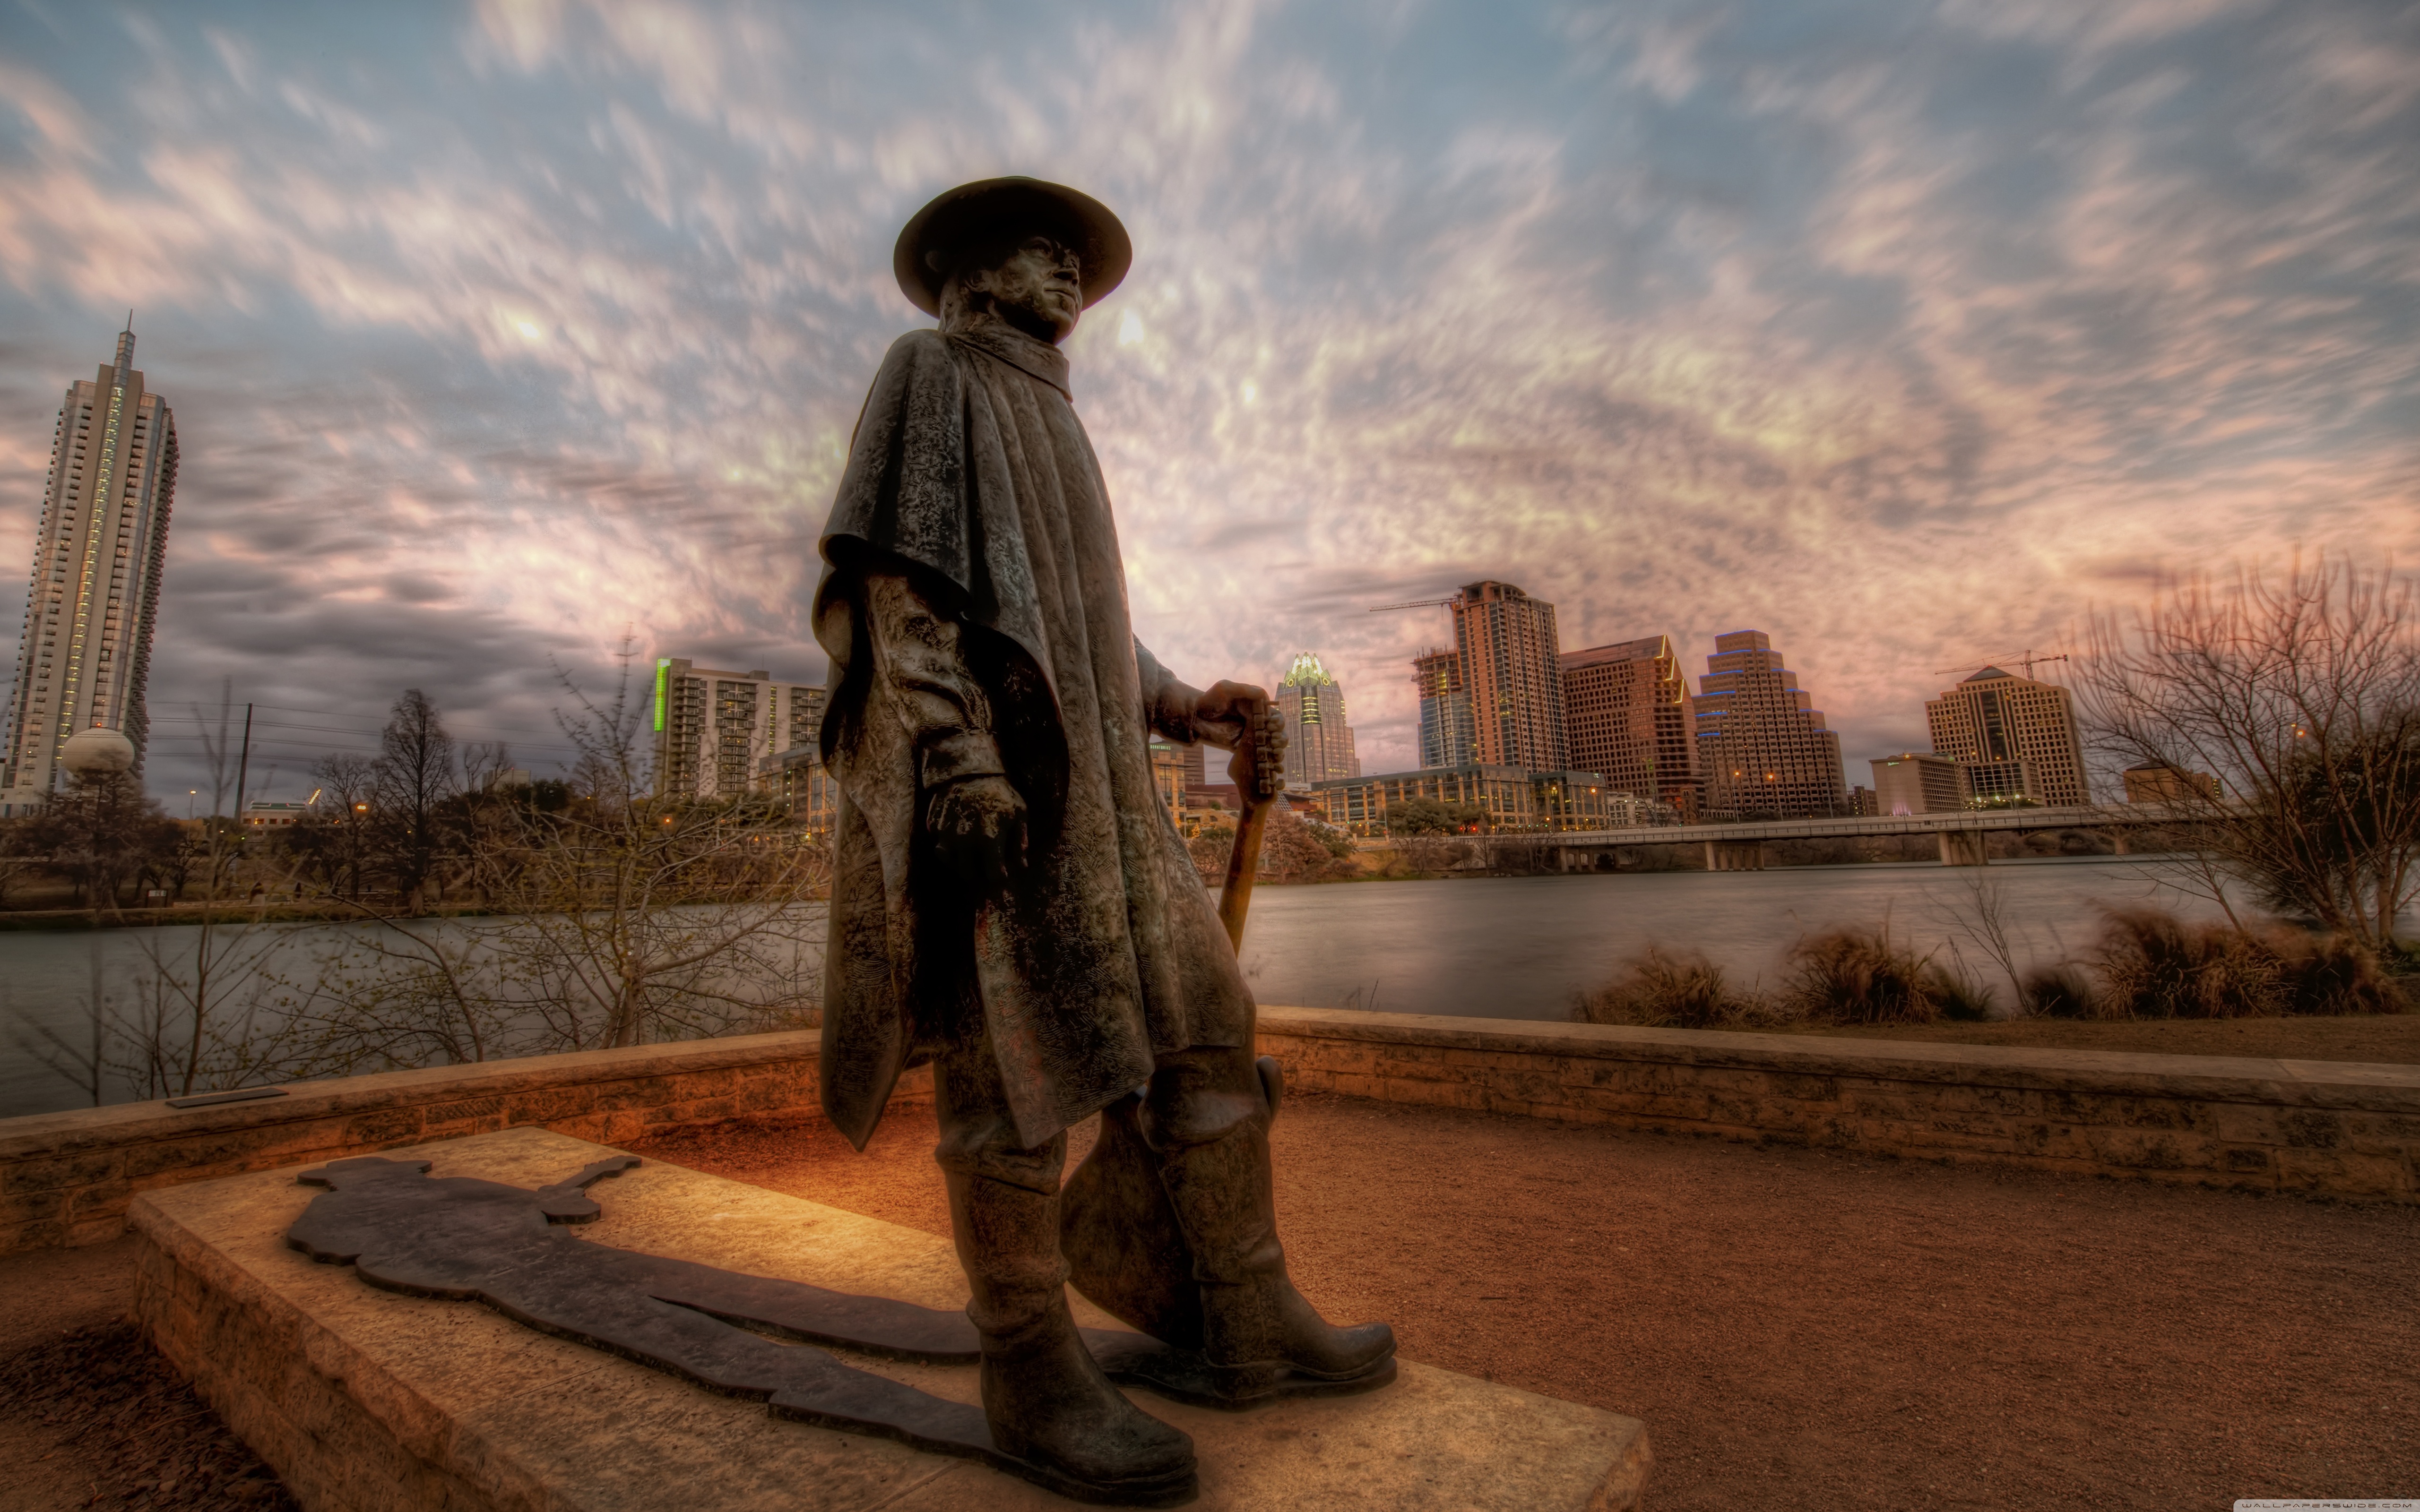 Download The Stevie Ray Vaughan Memorial Statue in Austin UltraHD Free Wall...